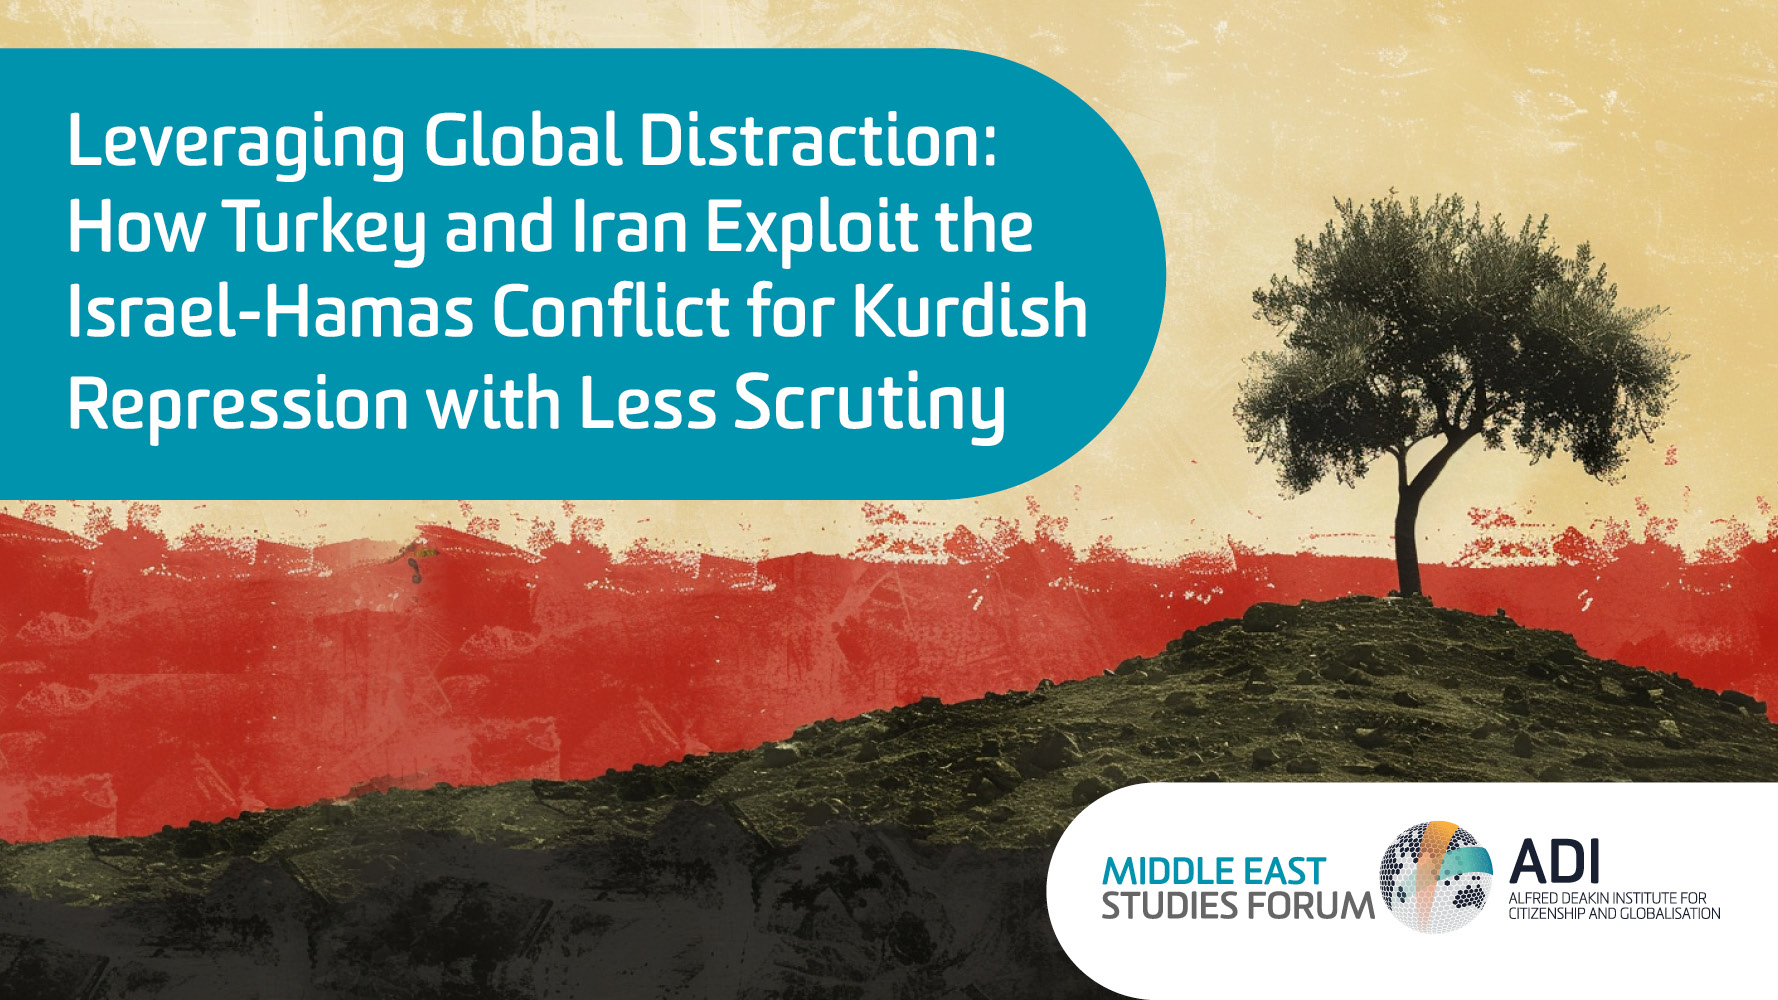 Leveraging Global Distraction: How Turkey and Iran Exploit the Israel-Hamas Conflict for Kurdish Repression with Less Scrutiny